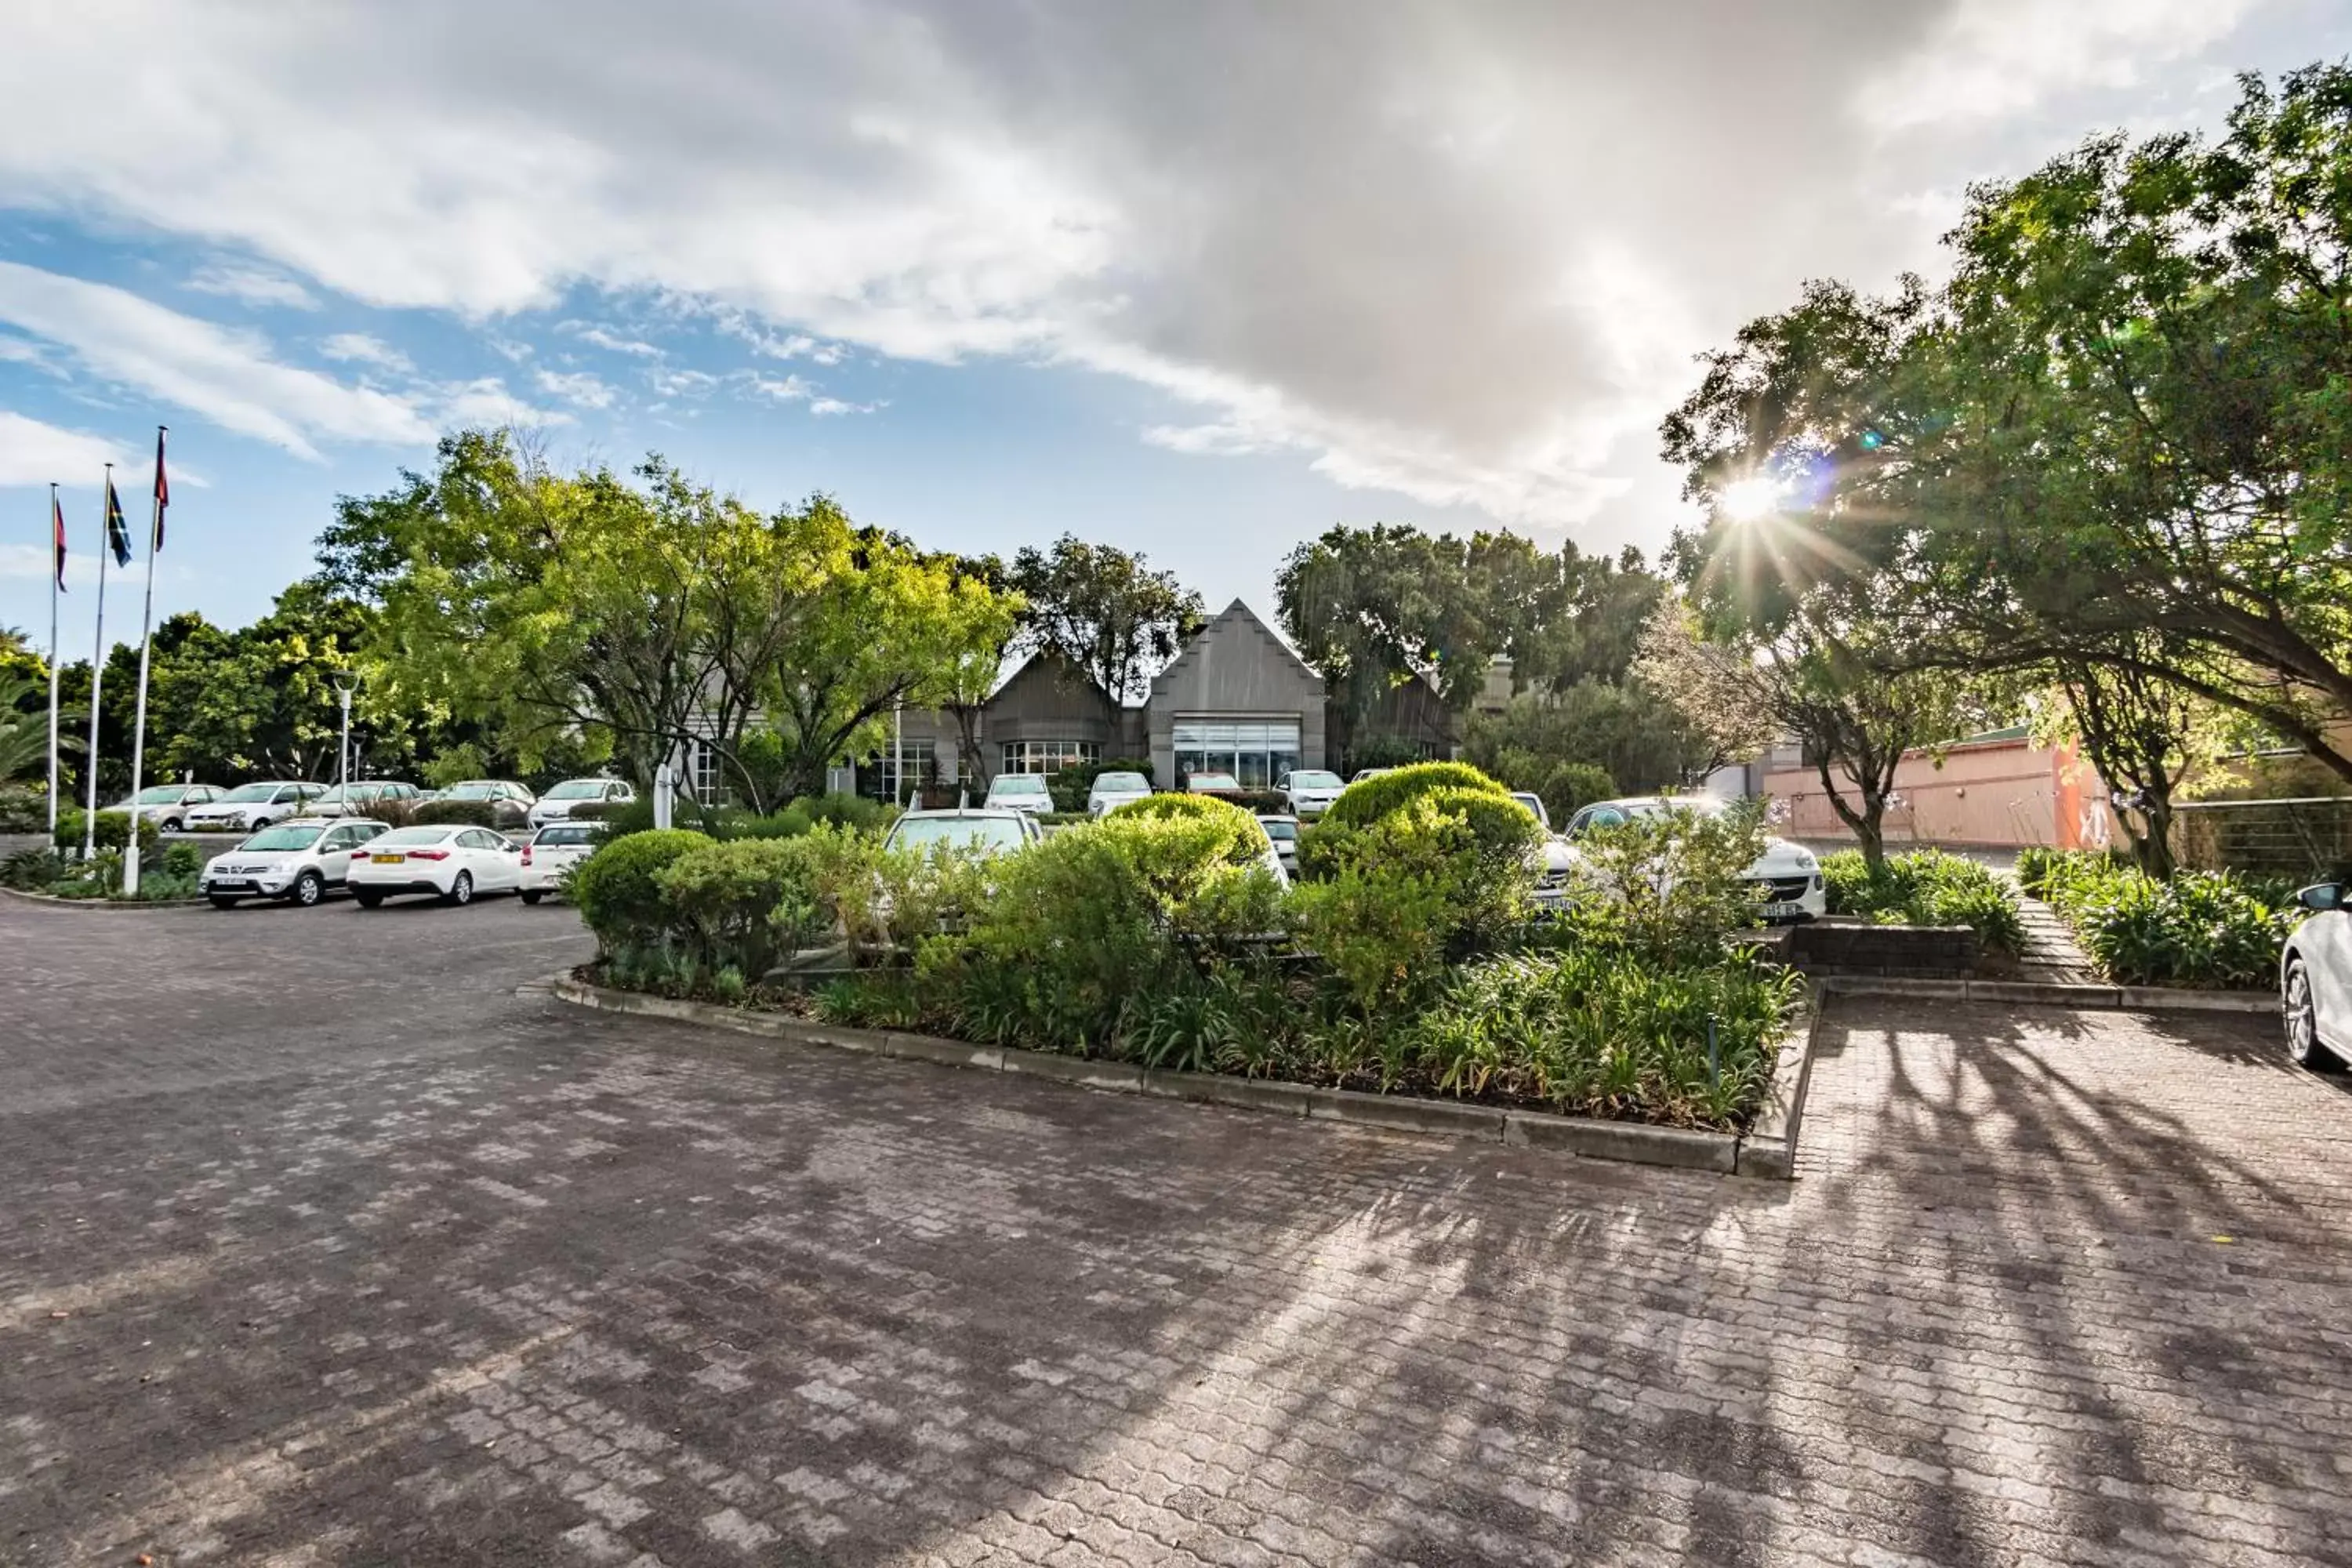 Property Building in City Lodge Hotel Pinelands